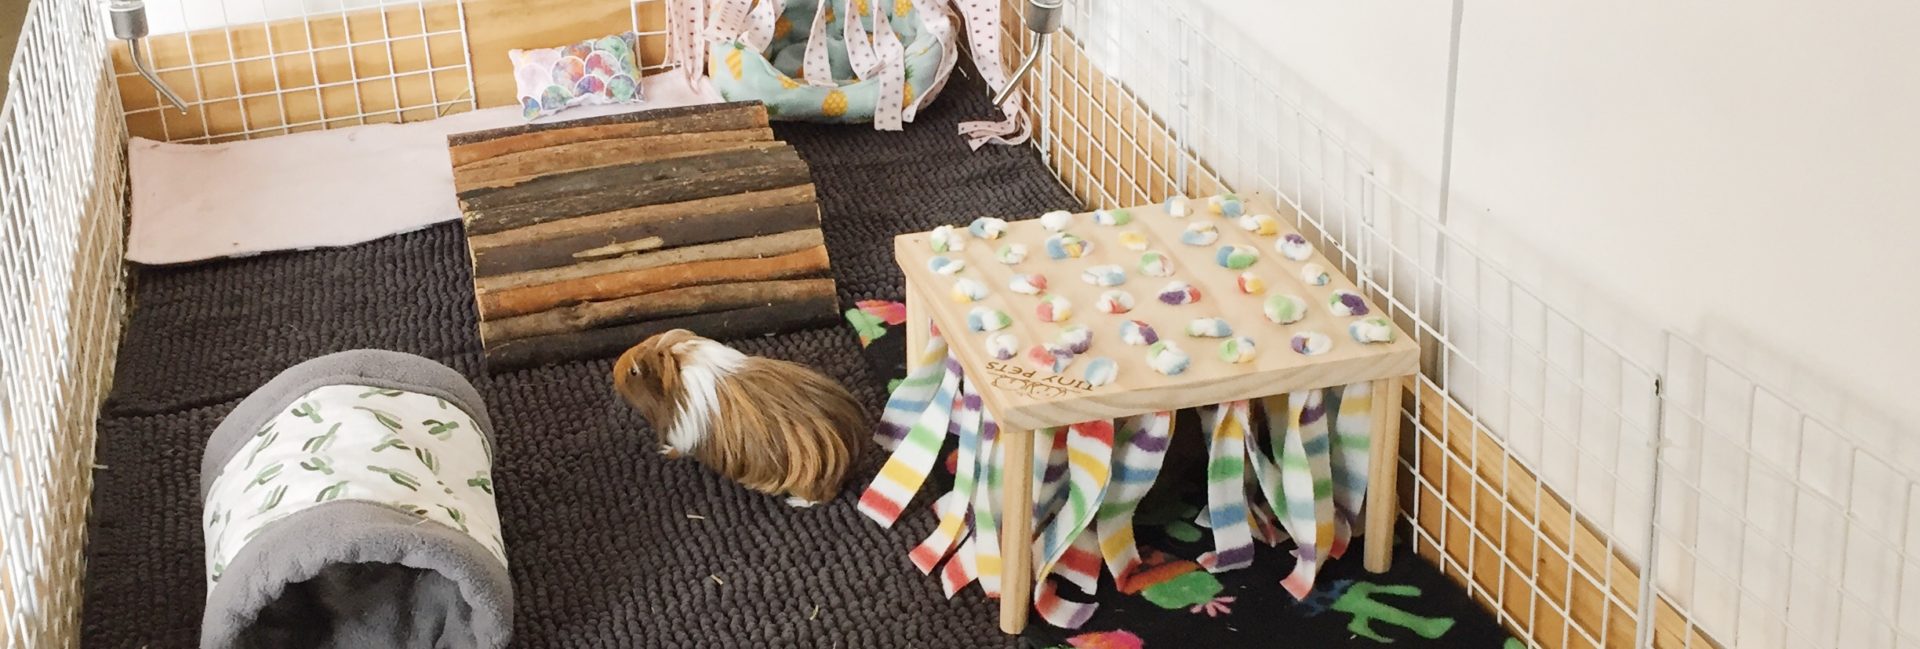 Olive and Ziggys guinea pig cage is handmade from plywood and a large wooden base. On the inside of the cage are three bath mats as liners, a wooden tunnel, a wooden hidey hut, some fleece cosy items and two large piles of hay and two water bottles.